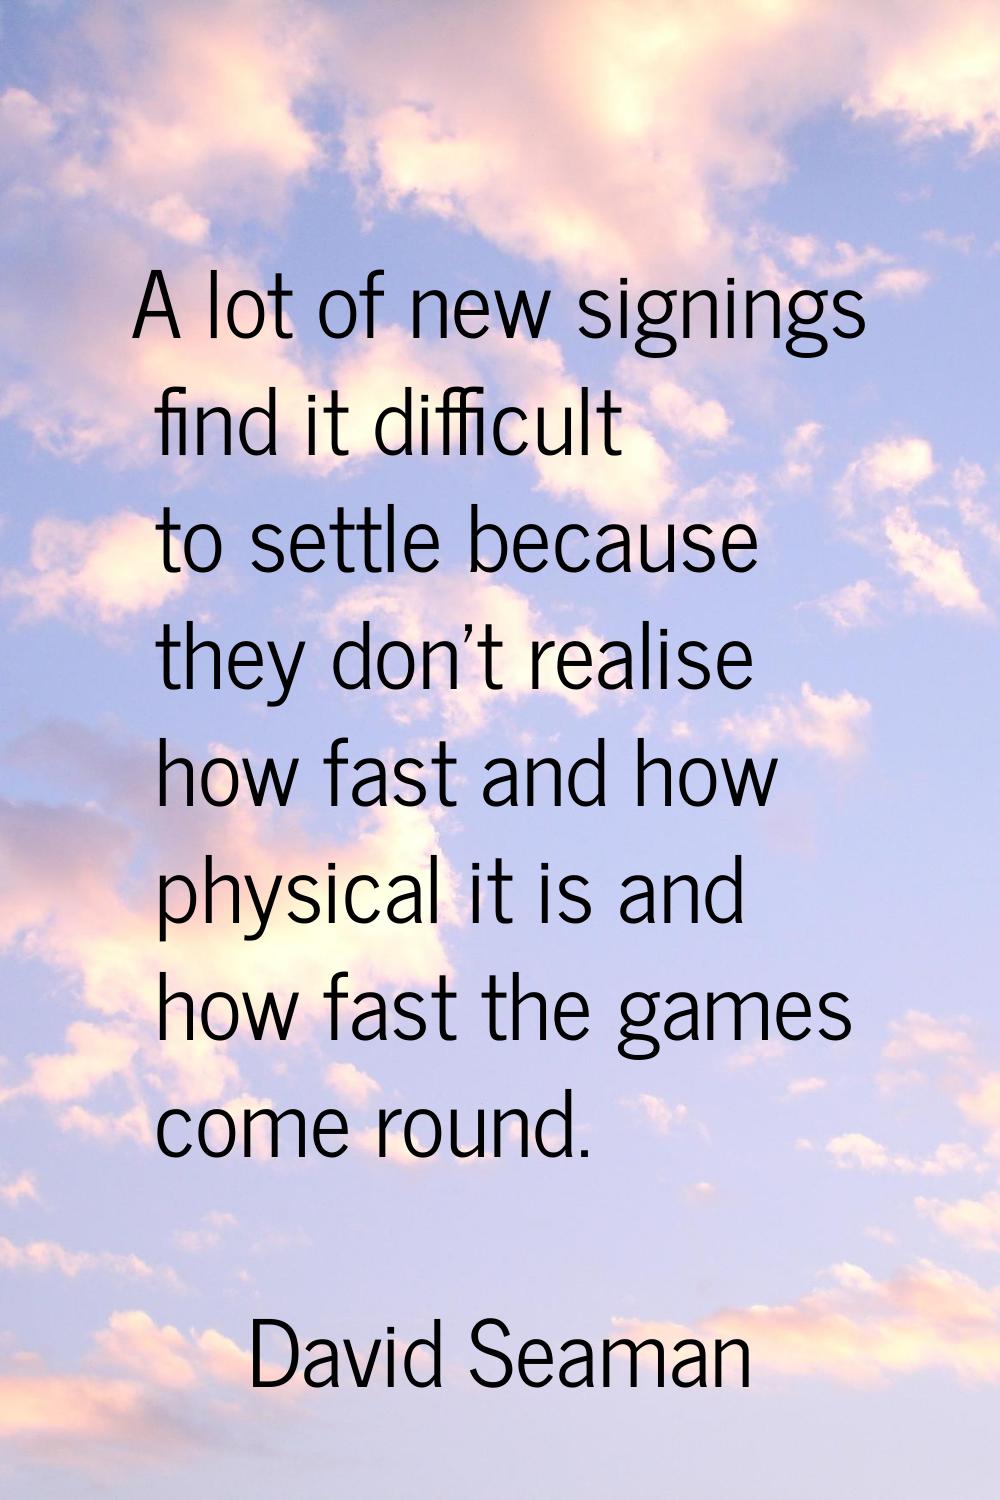 A lot of new signings find it difficult to settle because they don't realise how fast and how physi